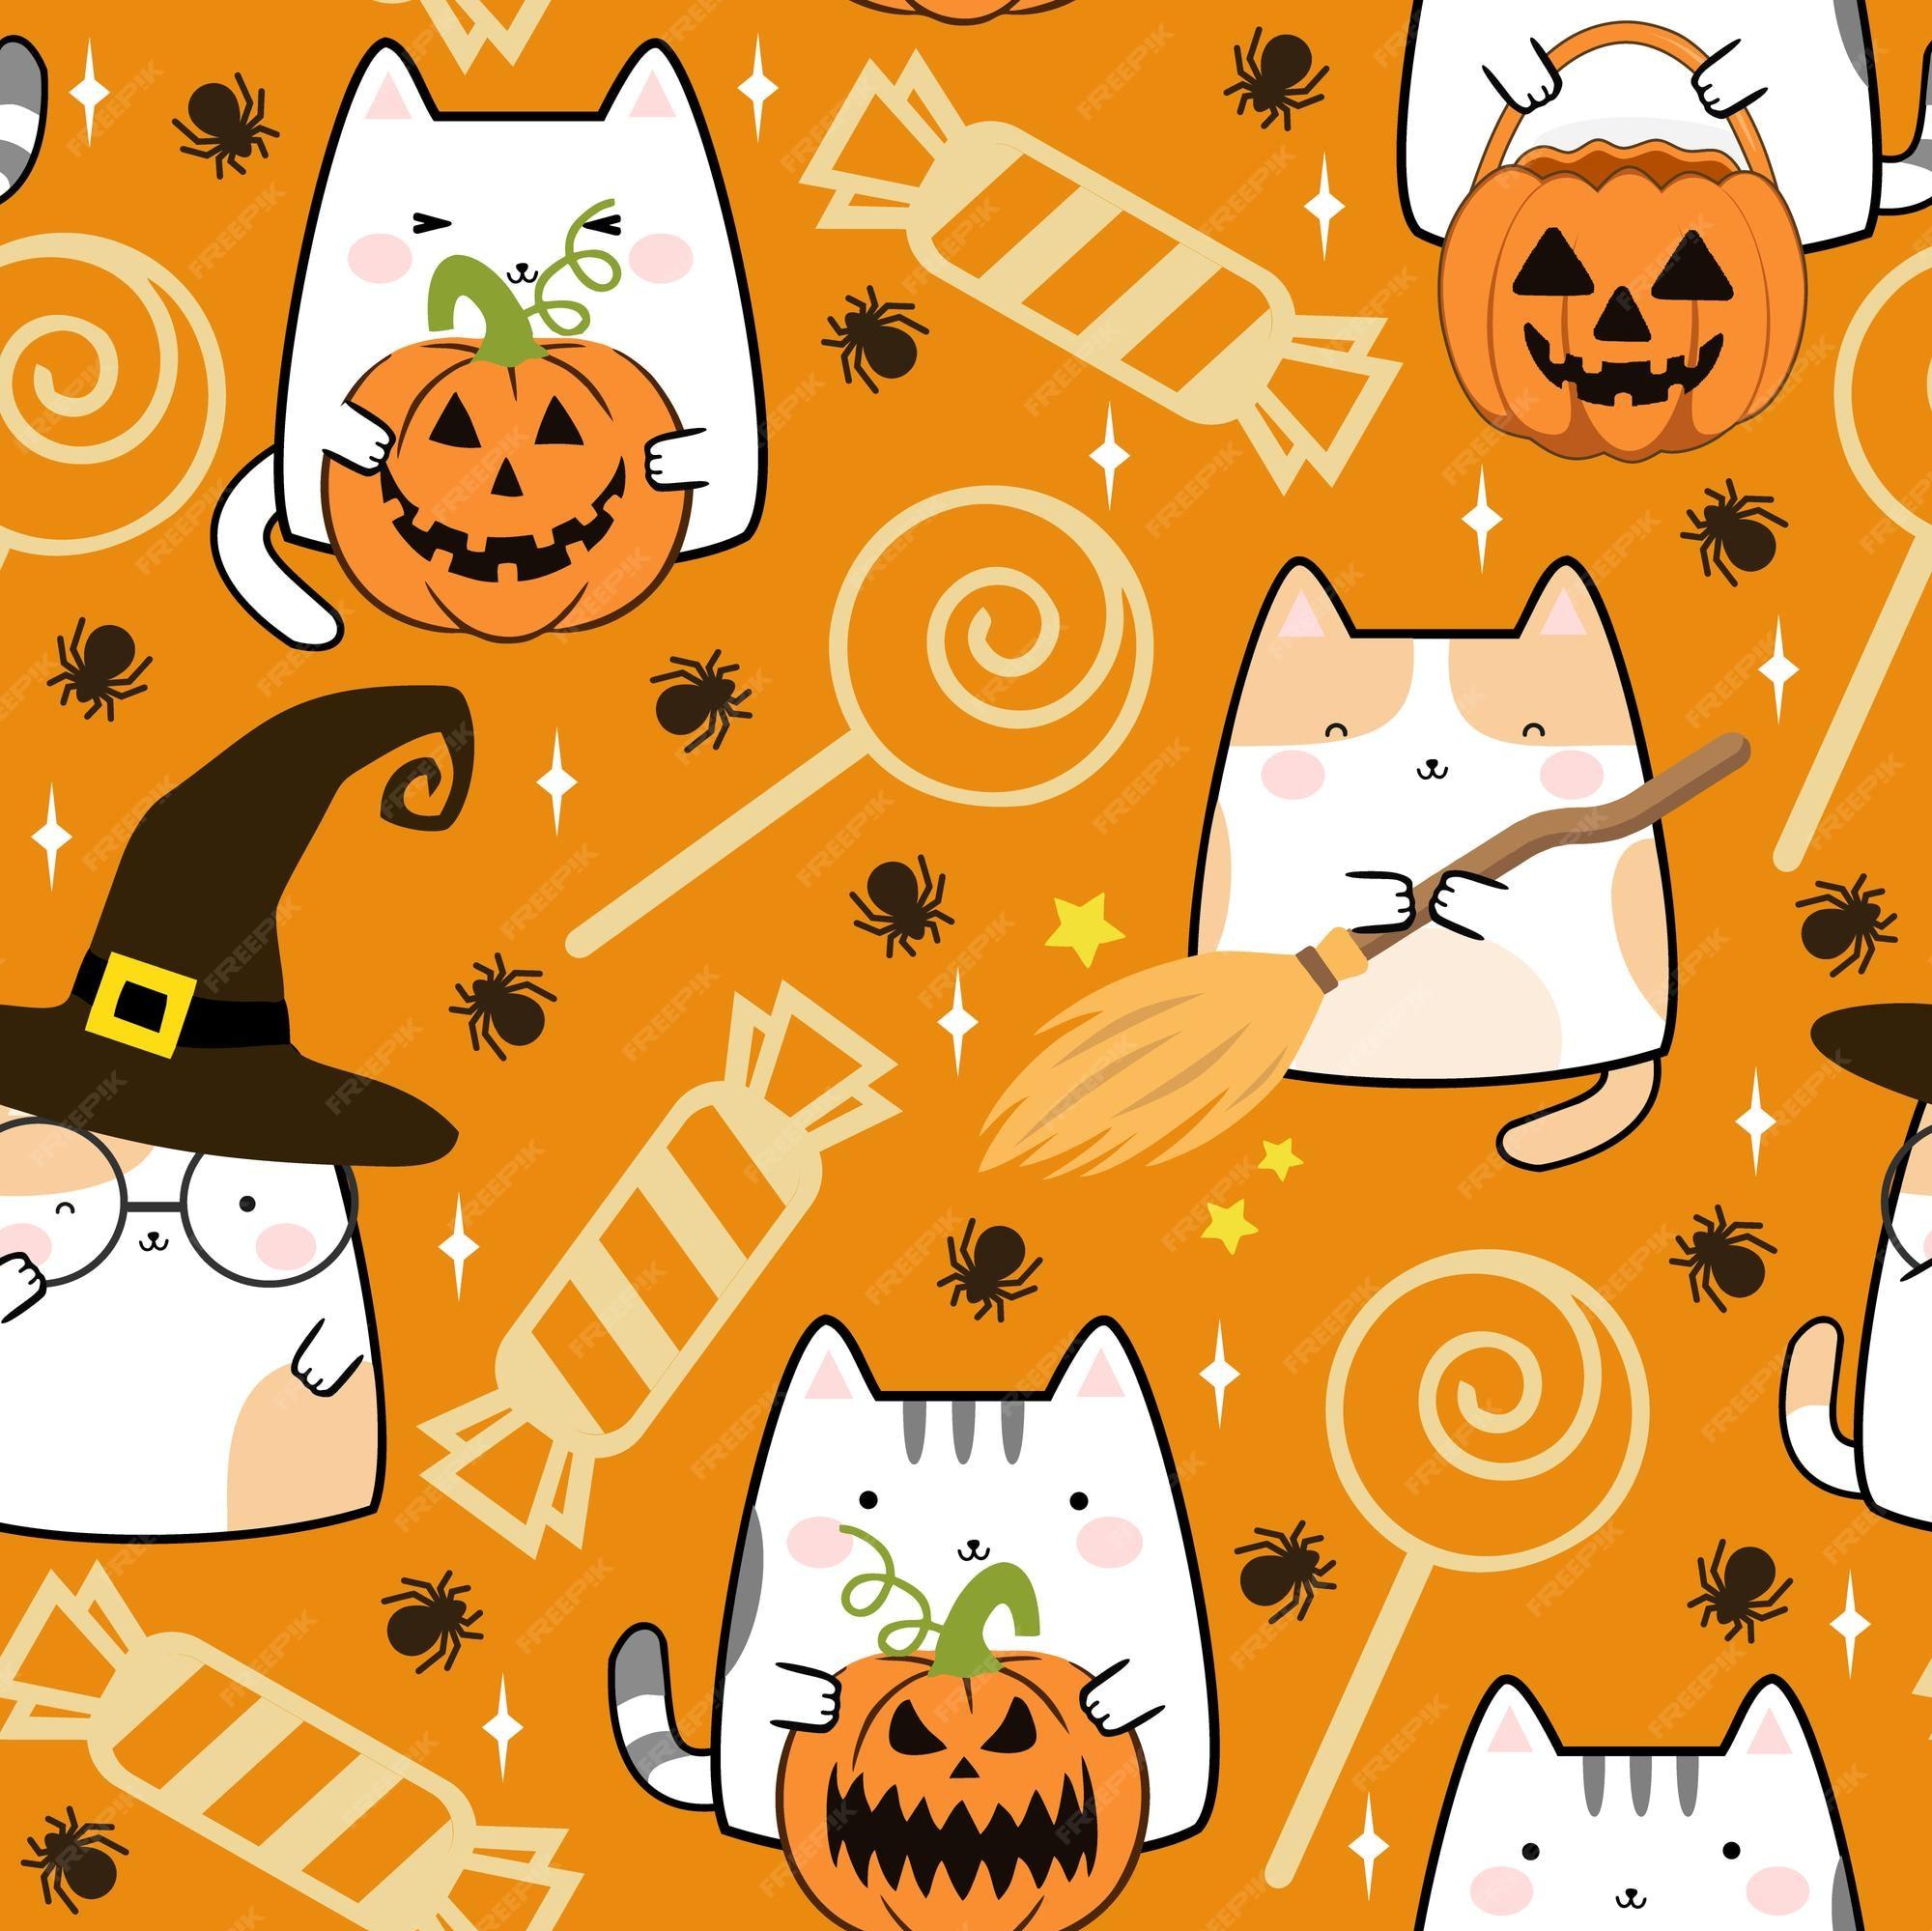 Premium Vector Seamless Pattern In Kawaii Cute Cat Style For